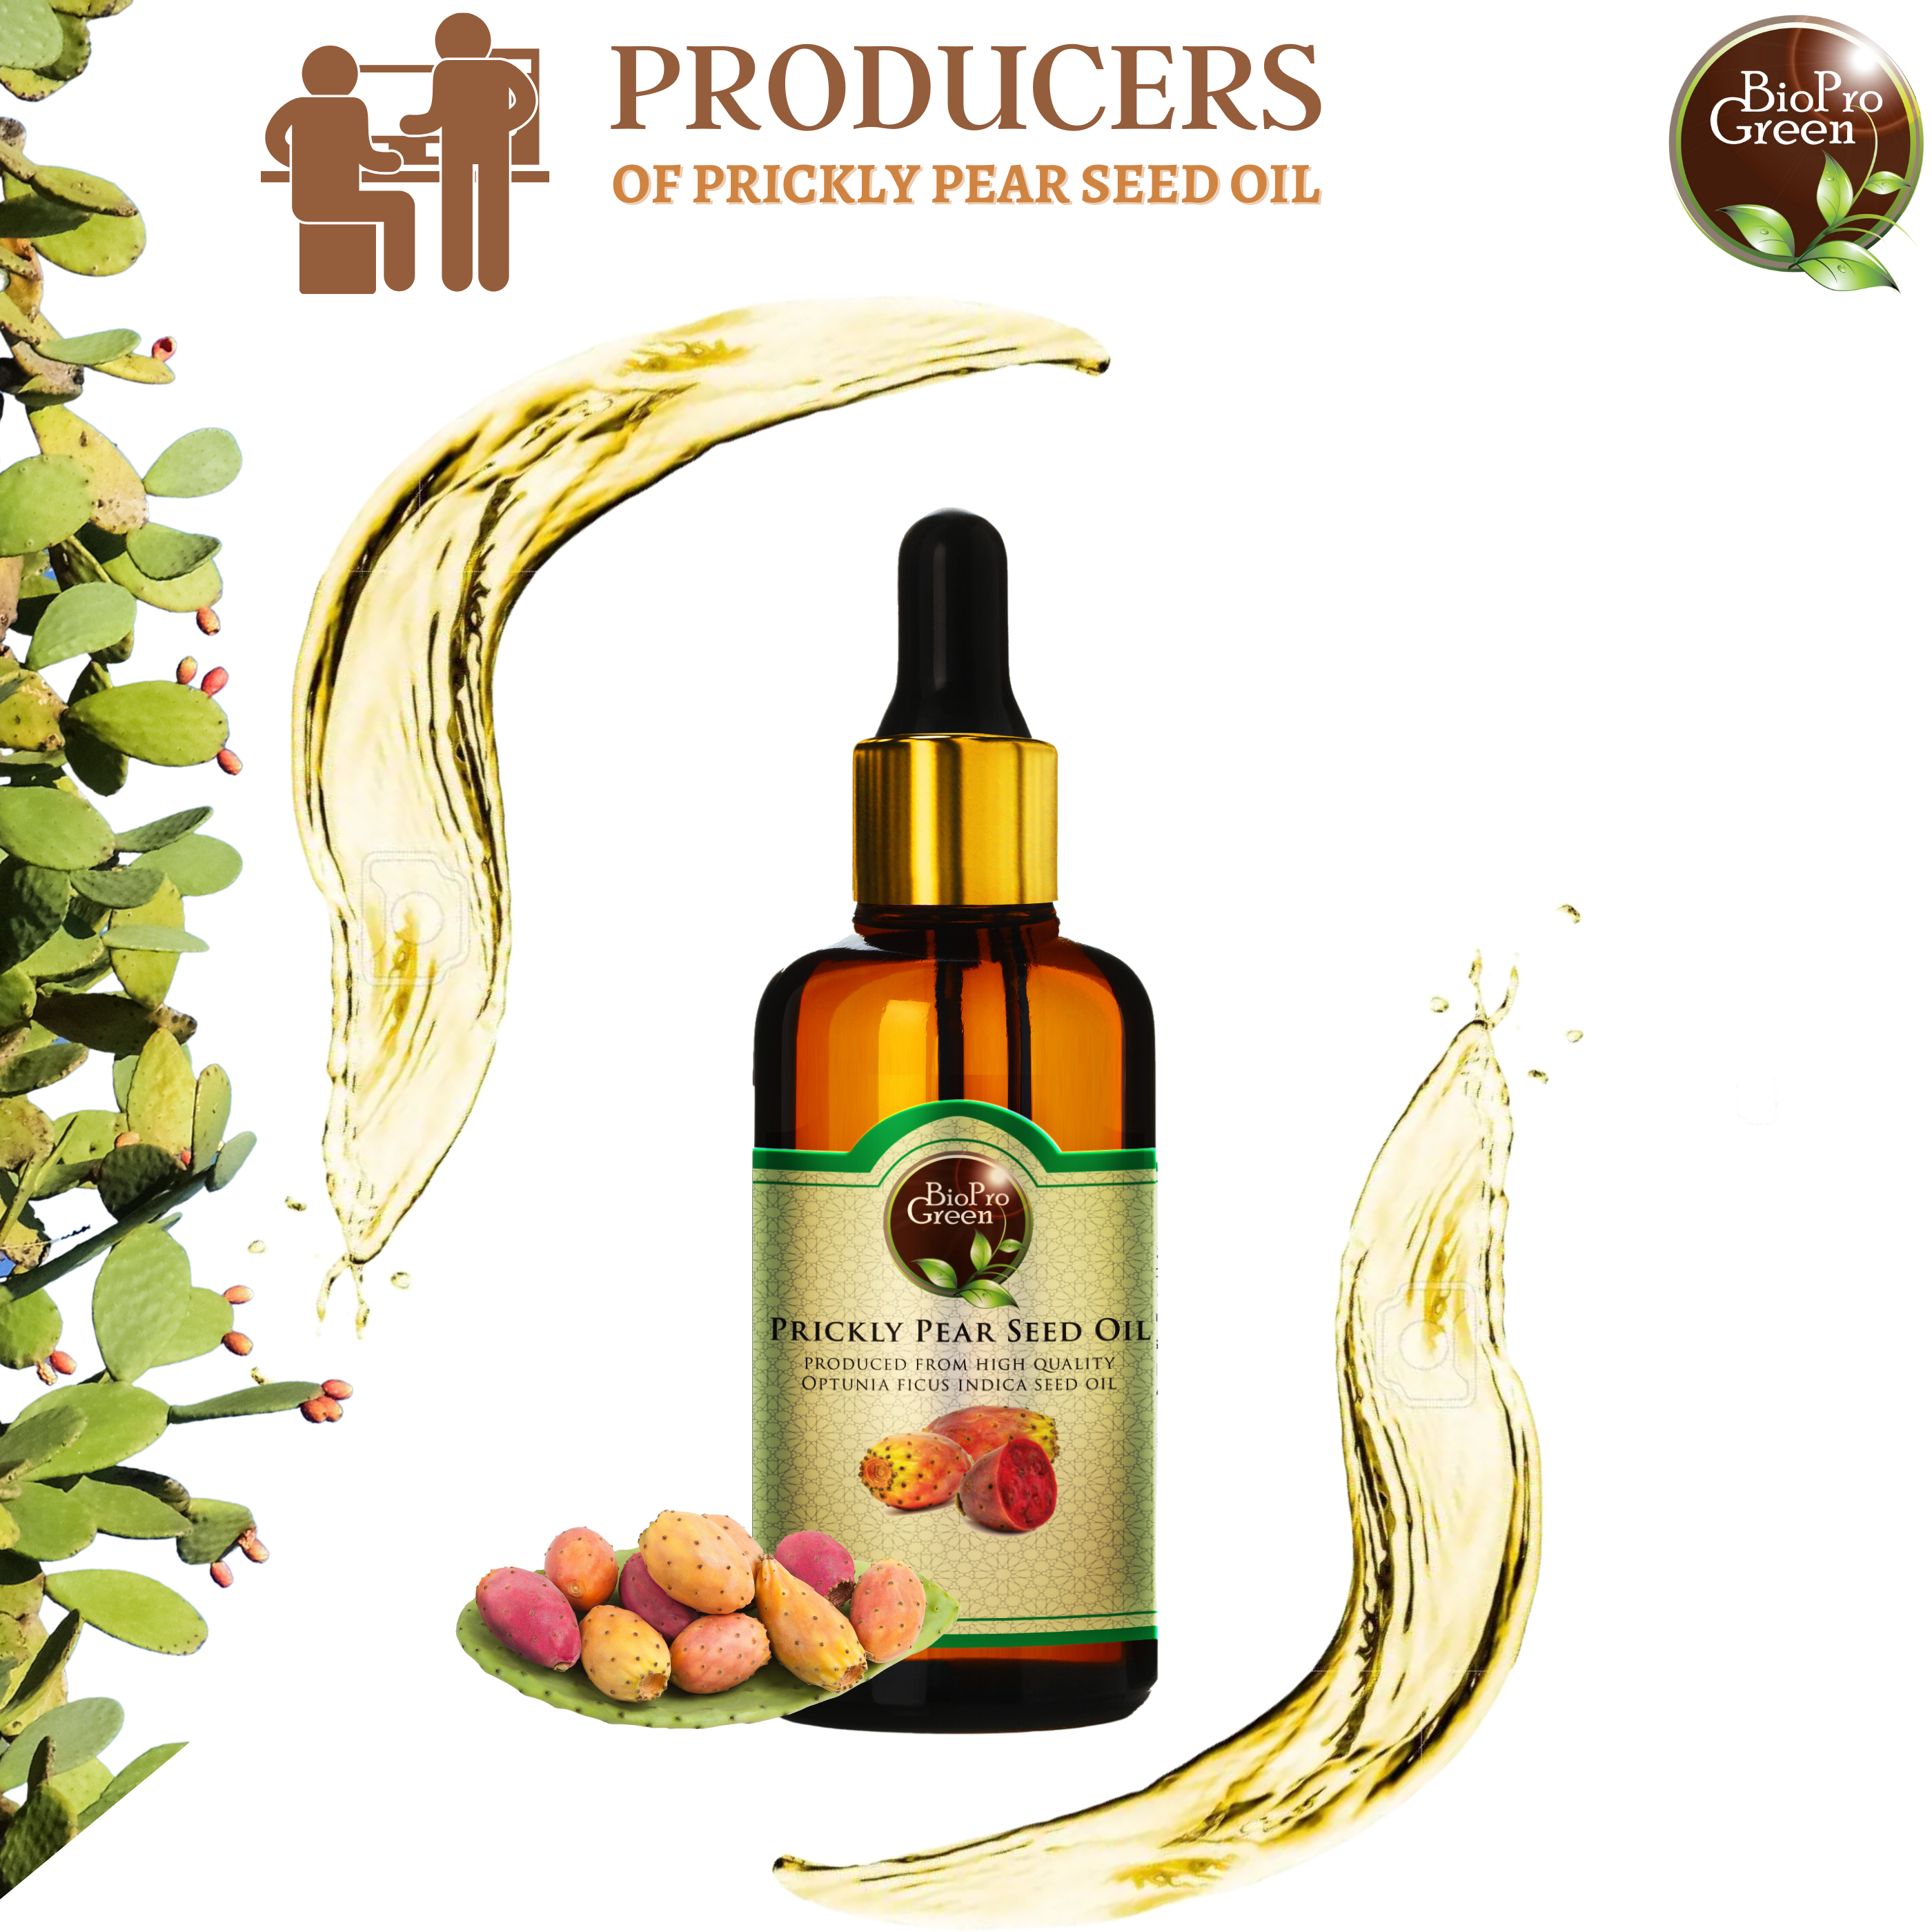 Prickly pear seed oil producers